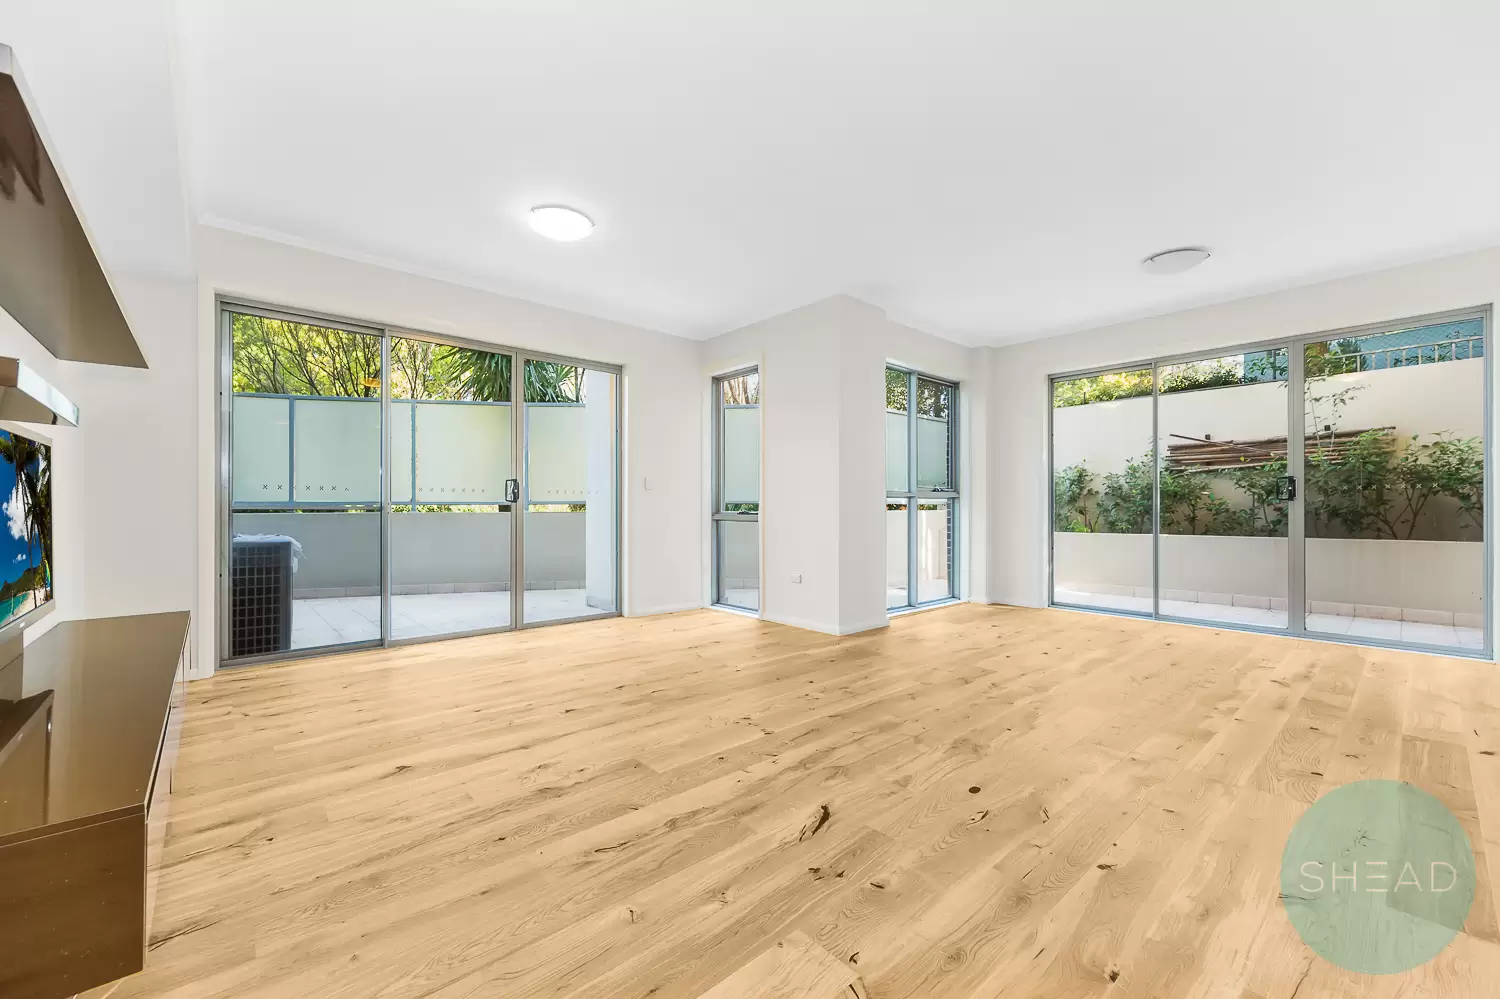 Turramurra Leased by Shead Property - image 1